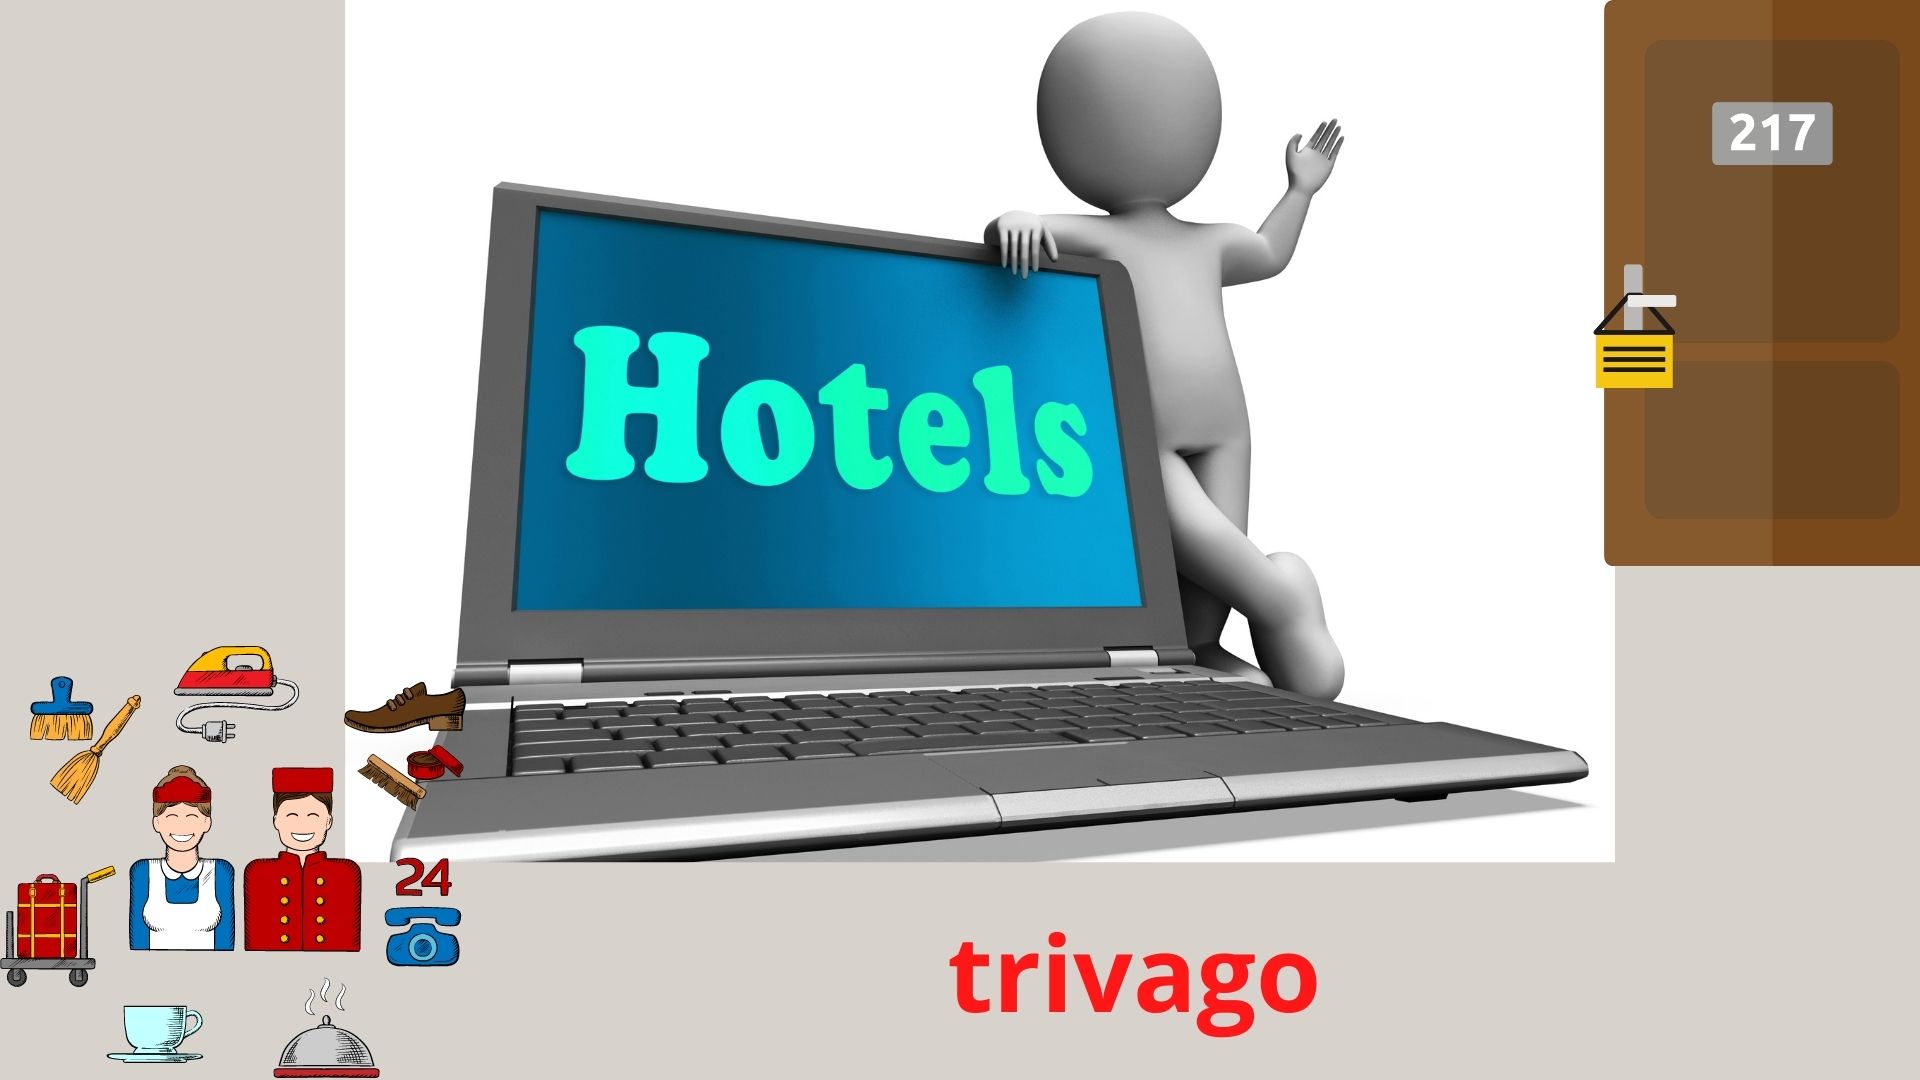 Trivago Hotel Booking Services